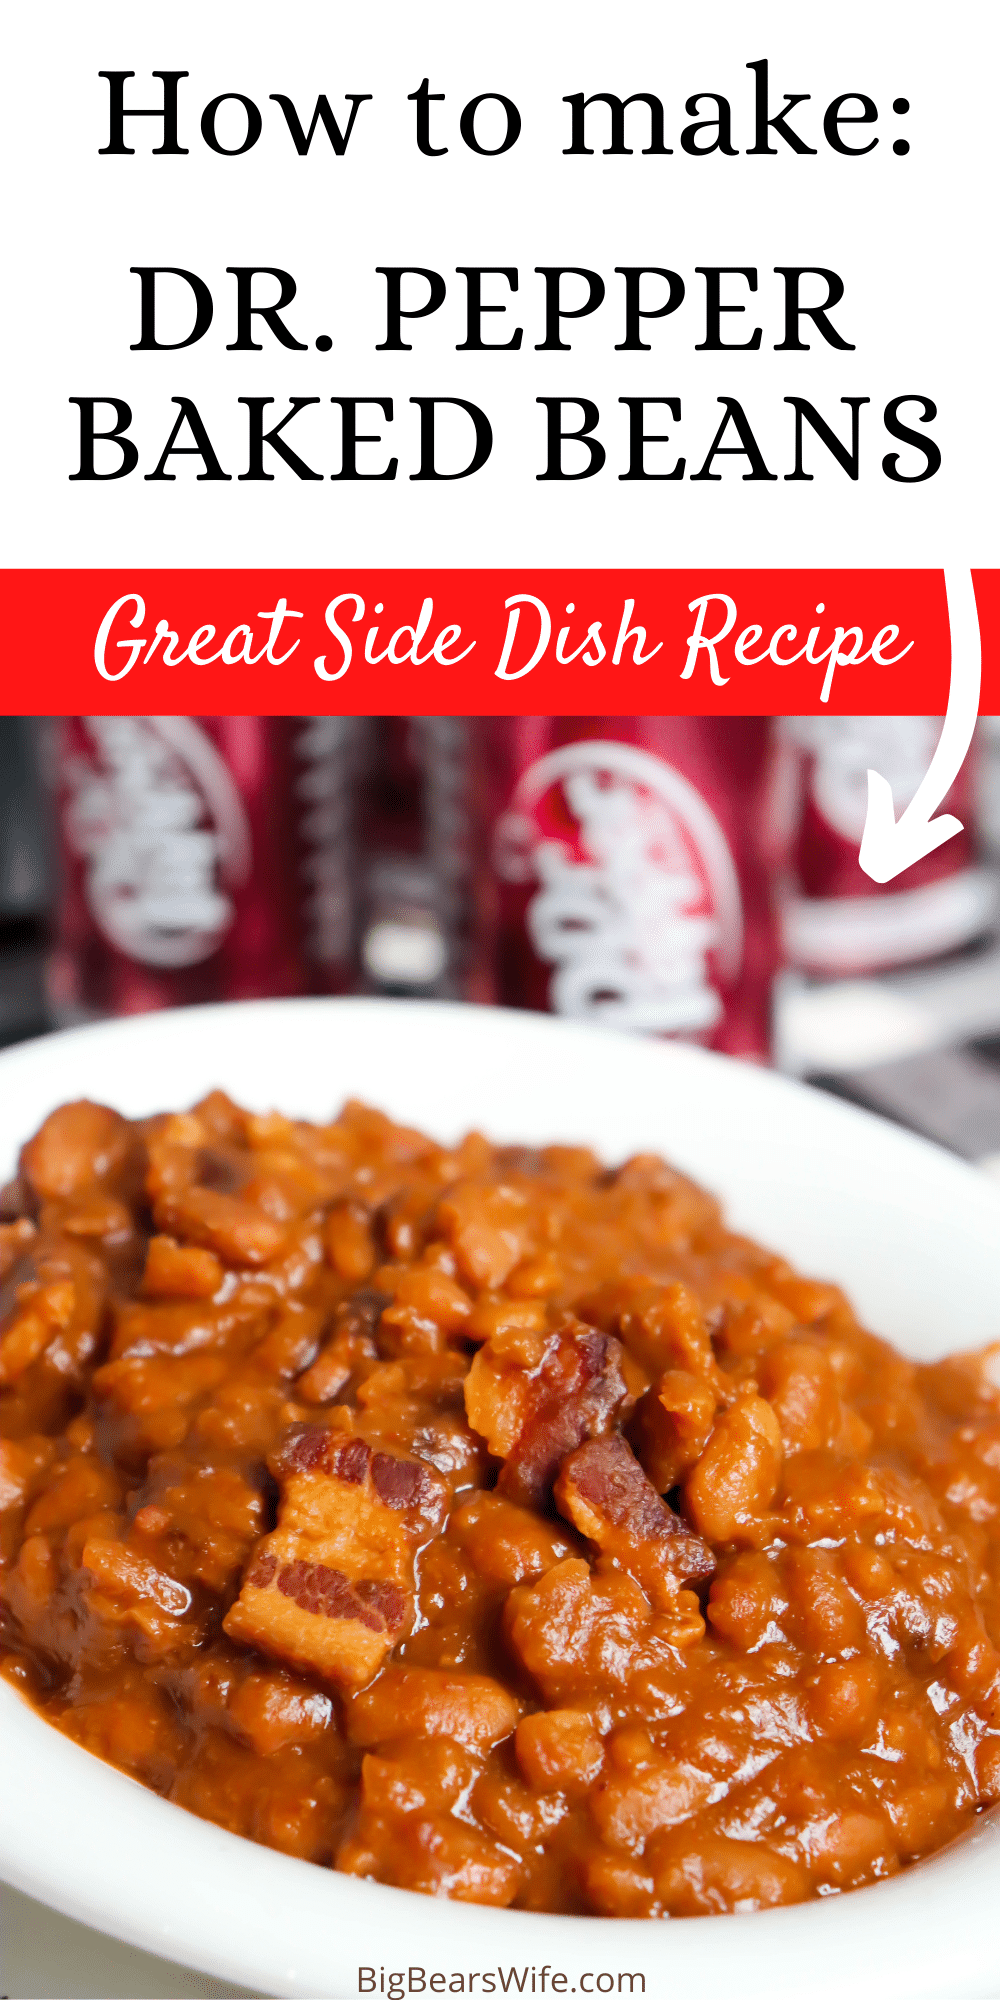 Dr. Pepper Baked Beans - delicious homemade baked beans with molasses, brown sugar, bacon and Dr. Pepper! Perfect side dishes for dinner, cookouts and holidays. via @bigbearswife